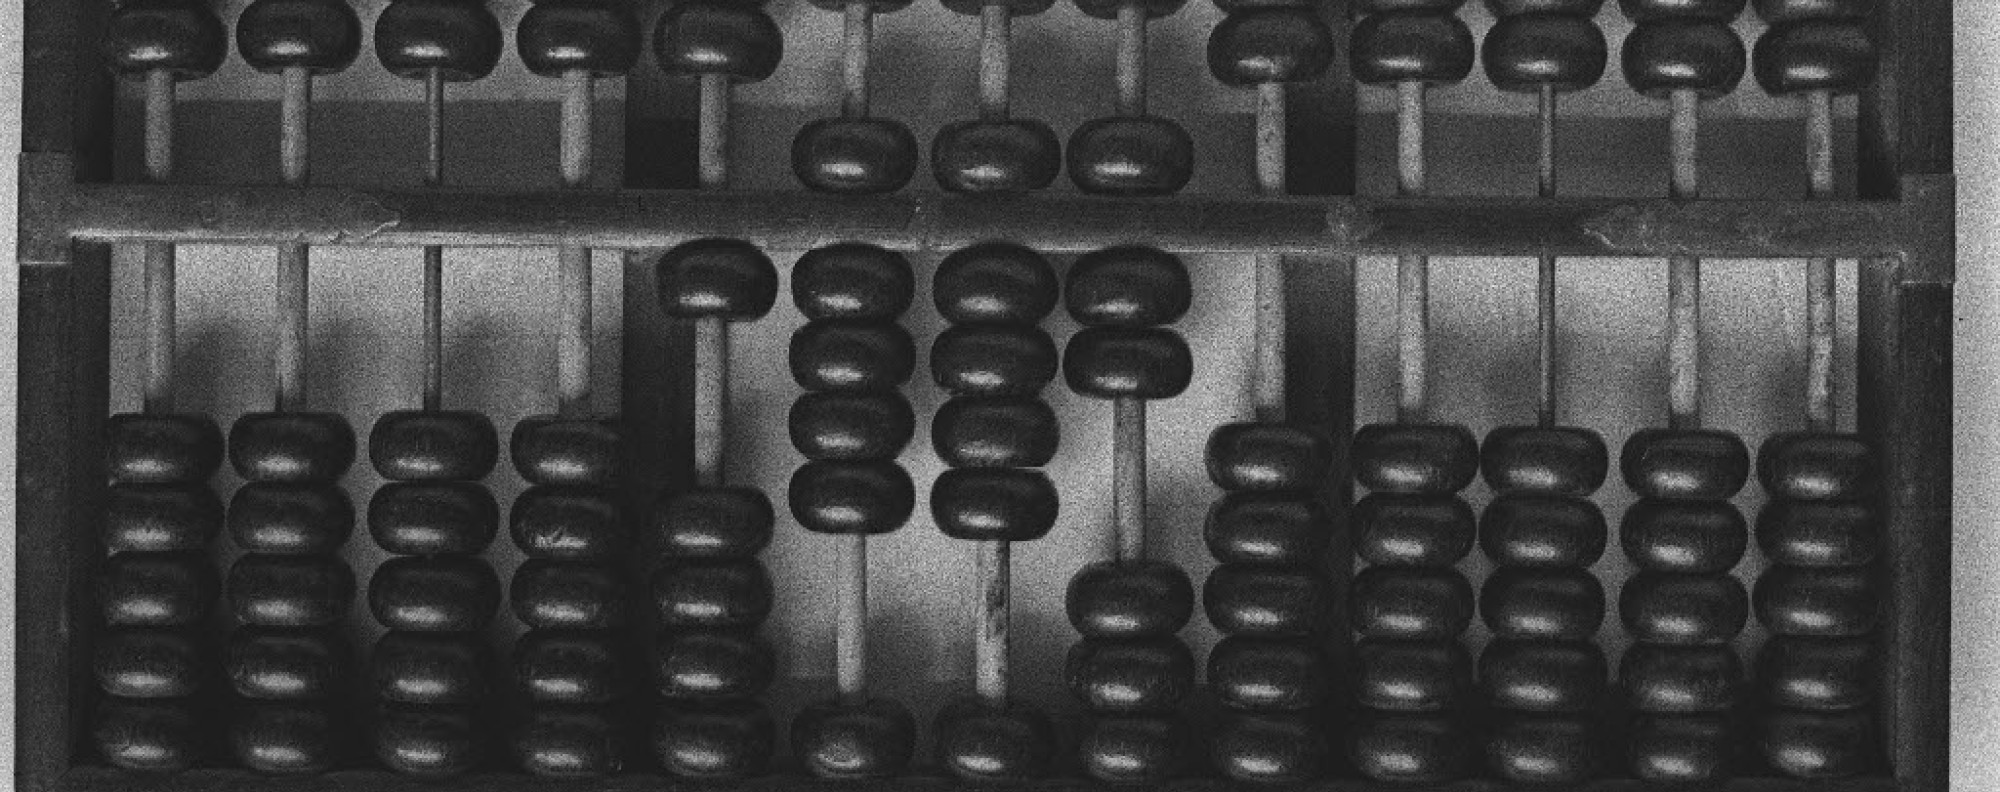 Who Invented The Abacus (When and Why?)